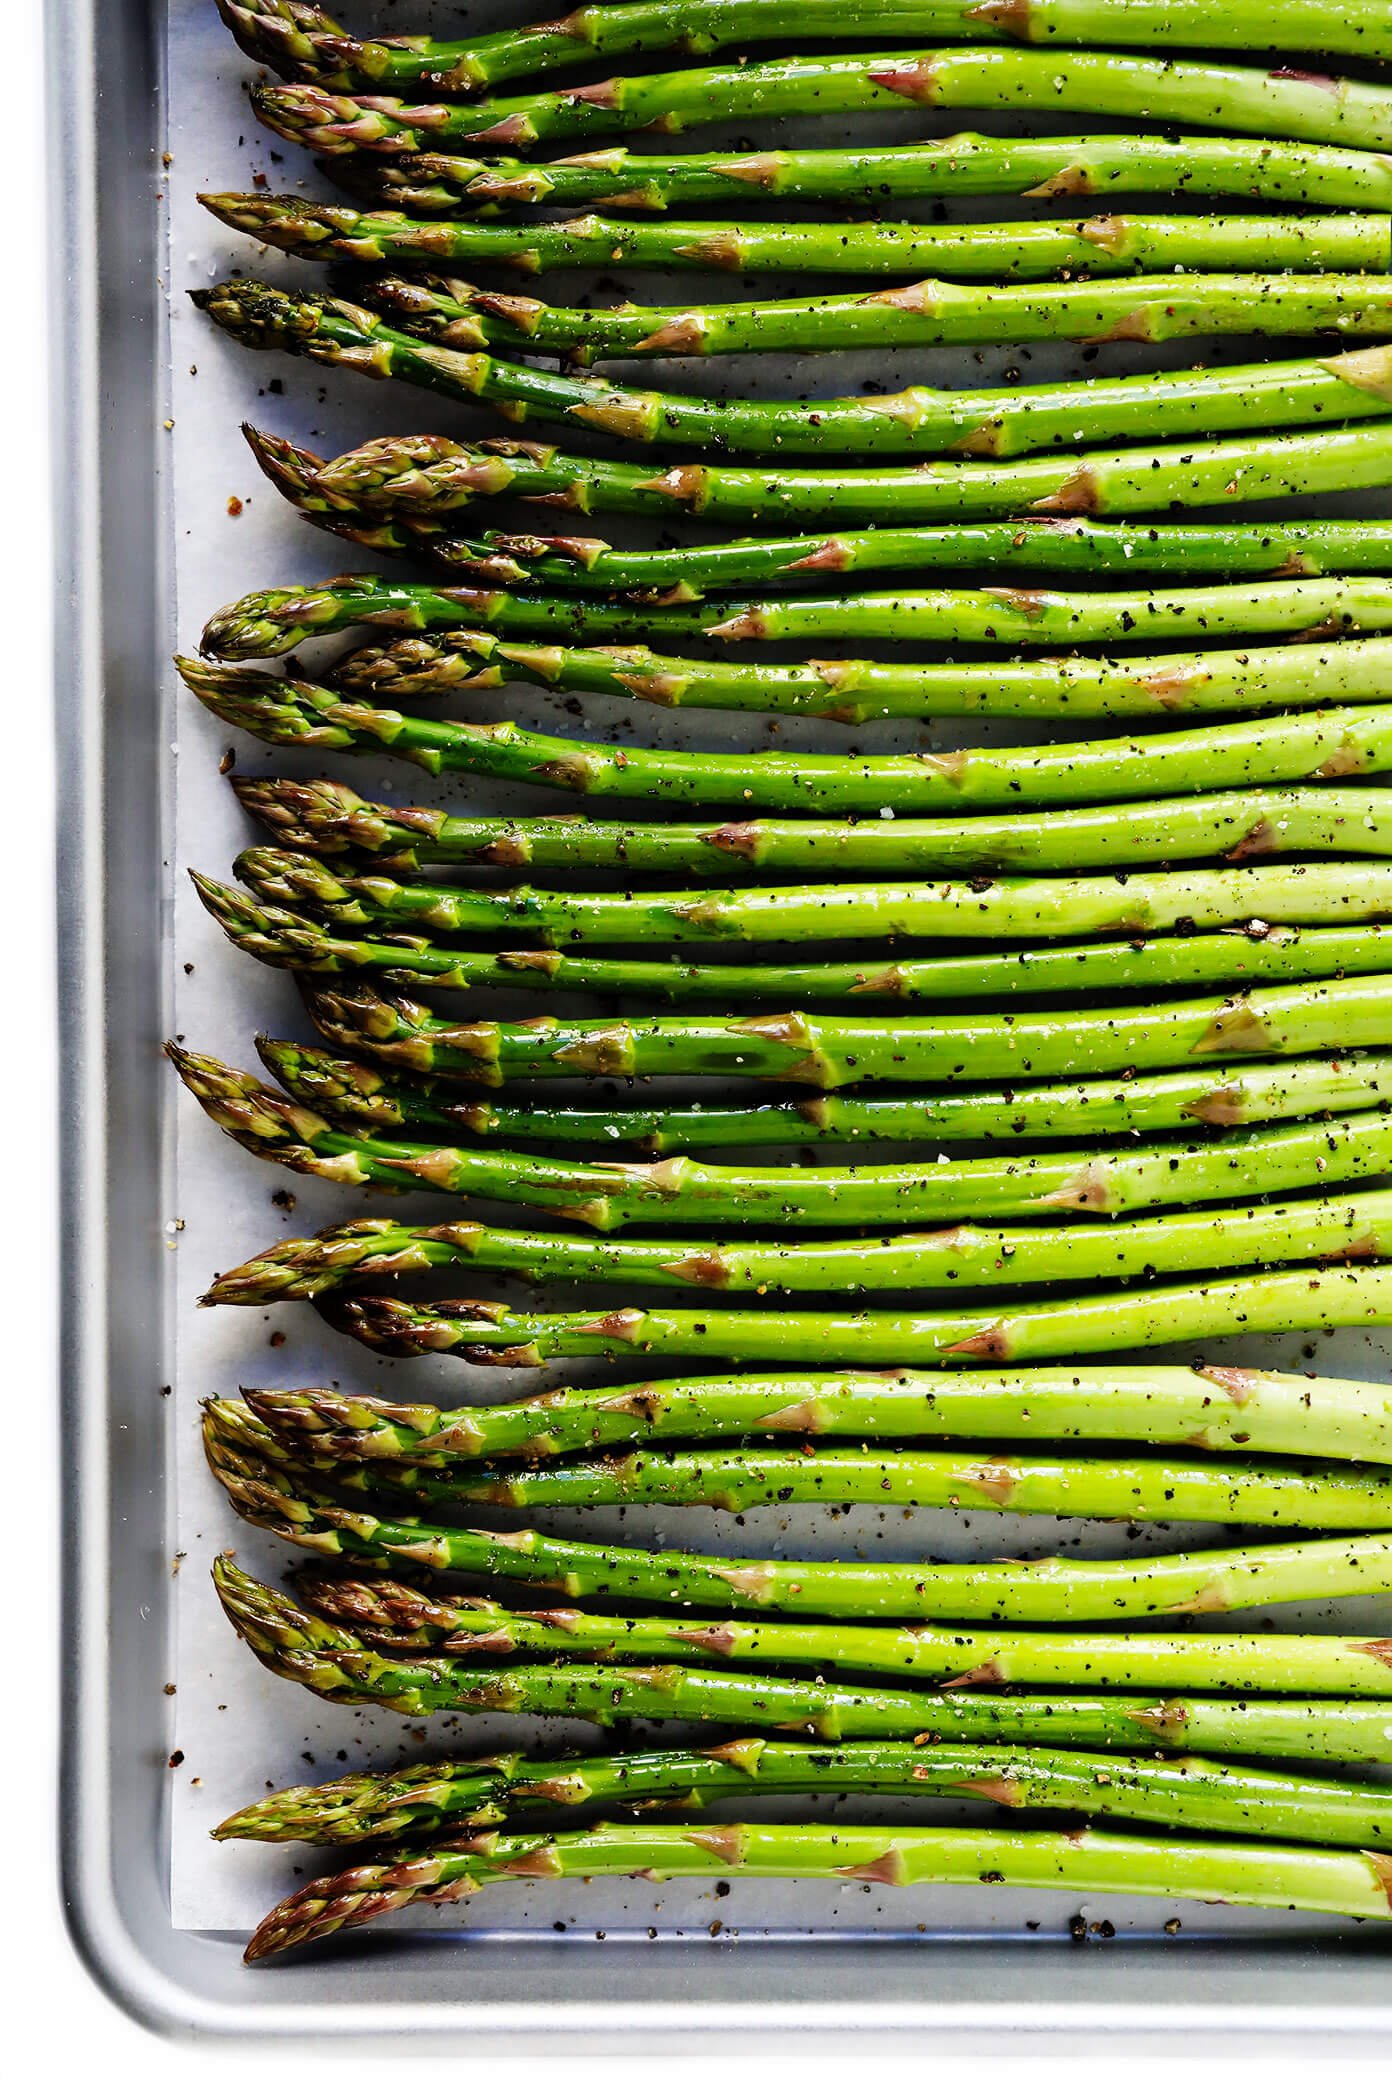 Roasted Asparagus Recipe Gimme Some Oven,Brick Driveway Entrance